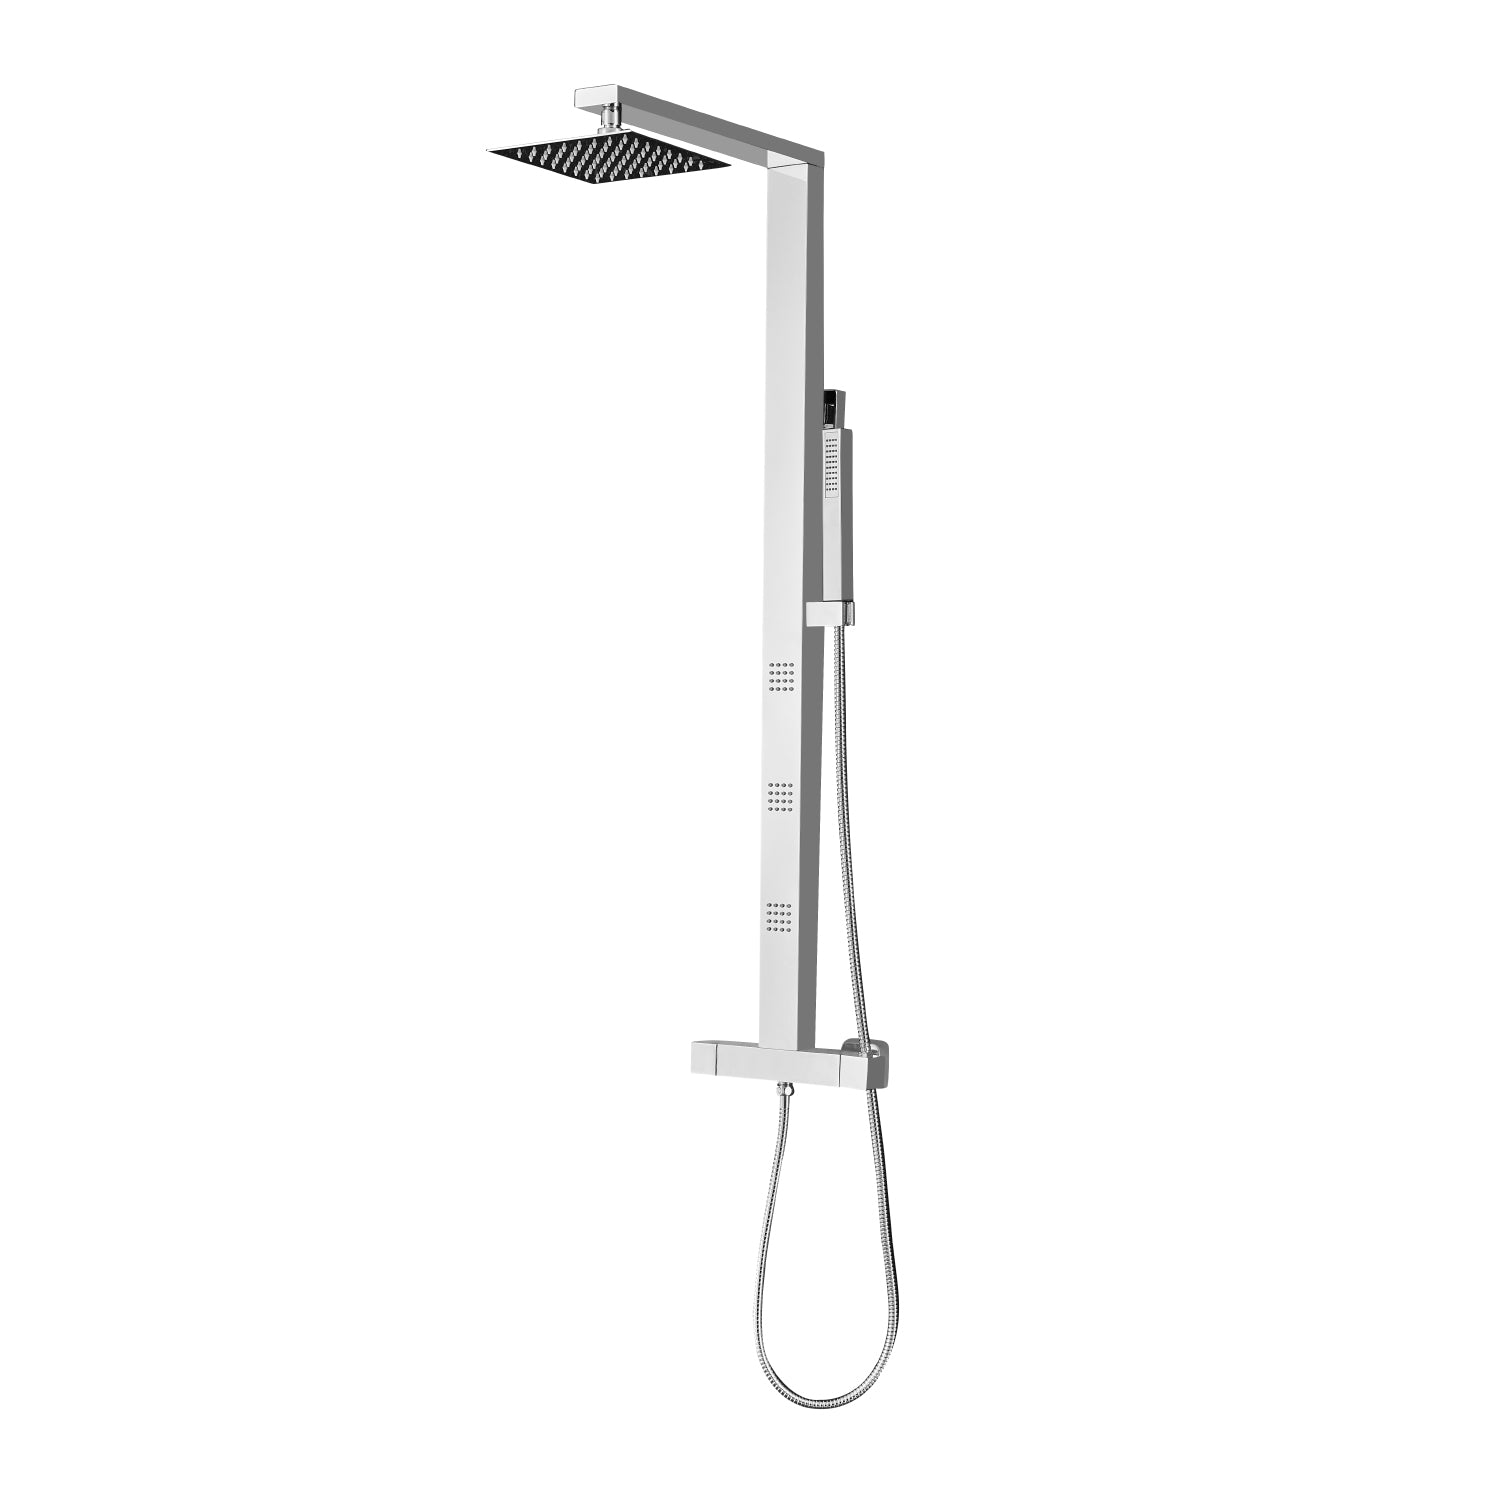 DAX Stainless Steel Shower Column Thermostatic Mixer Body Jets Hand Shower  (DAX-019-CR)